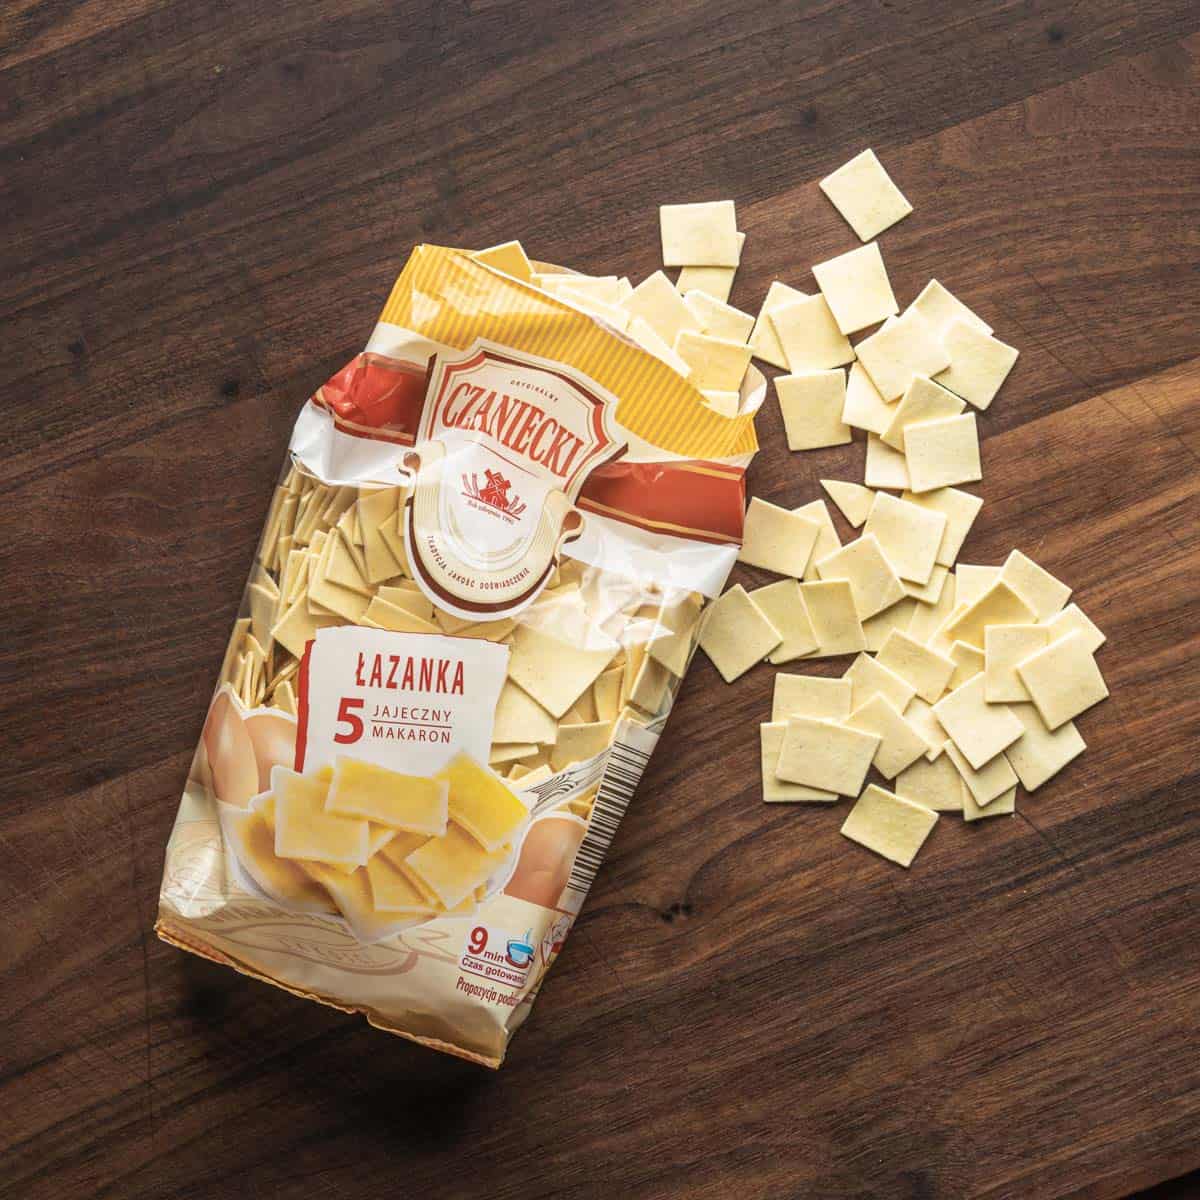 a bag of polish lazanki pasta, the bag cut open and square pasta laid out.